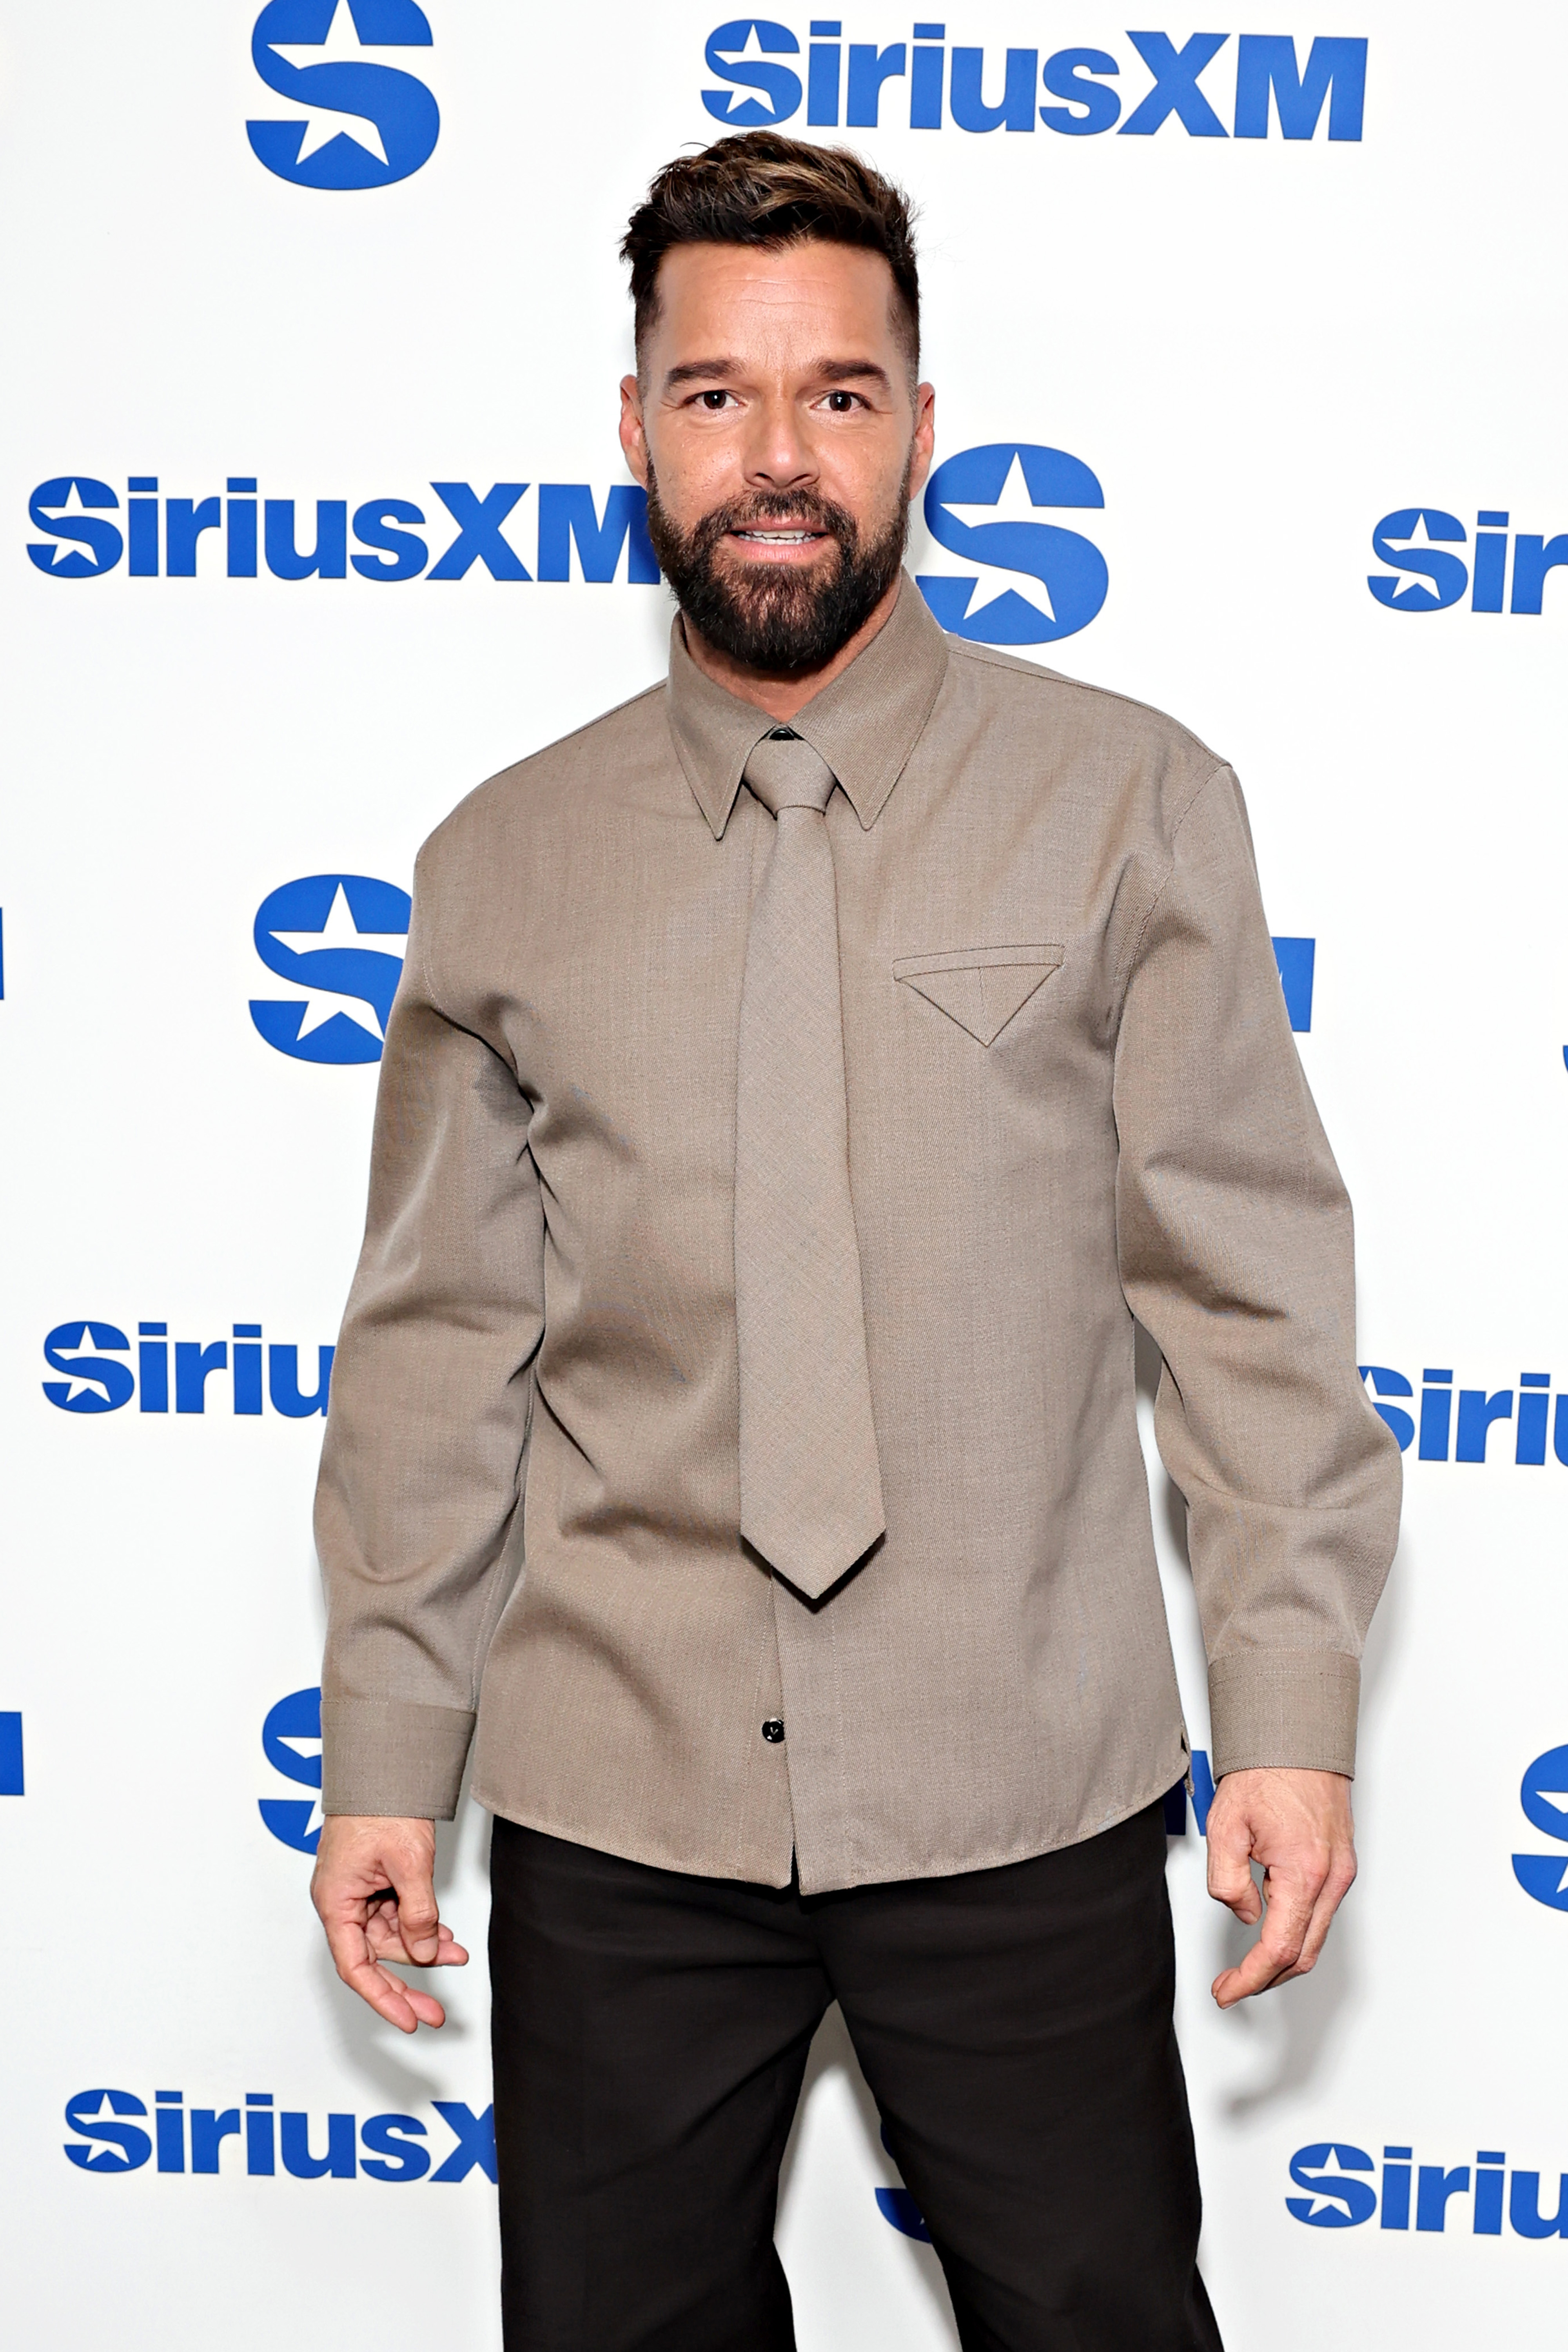 Ricky Martin poses in front of SiriusXM backdrop, wearing a stylish beige shirt and matching trousers